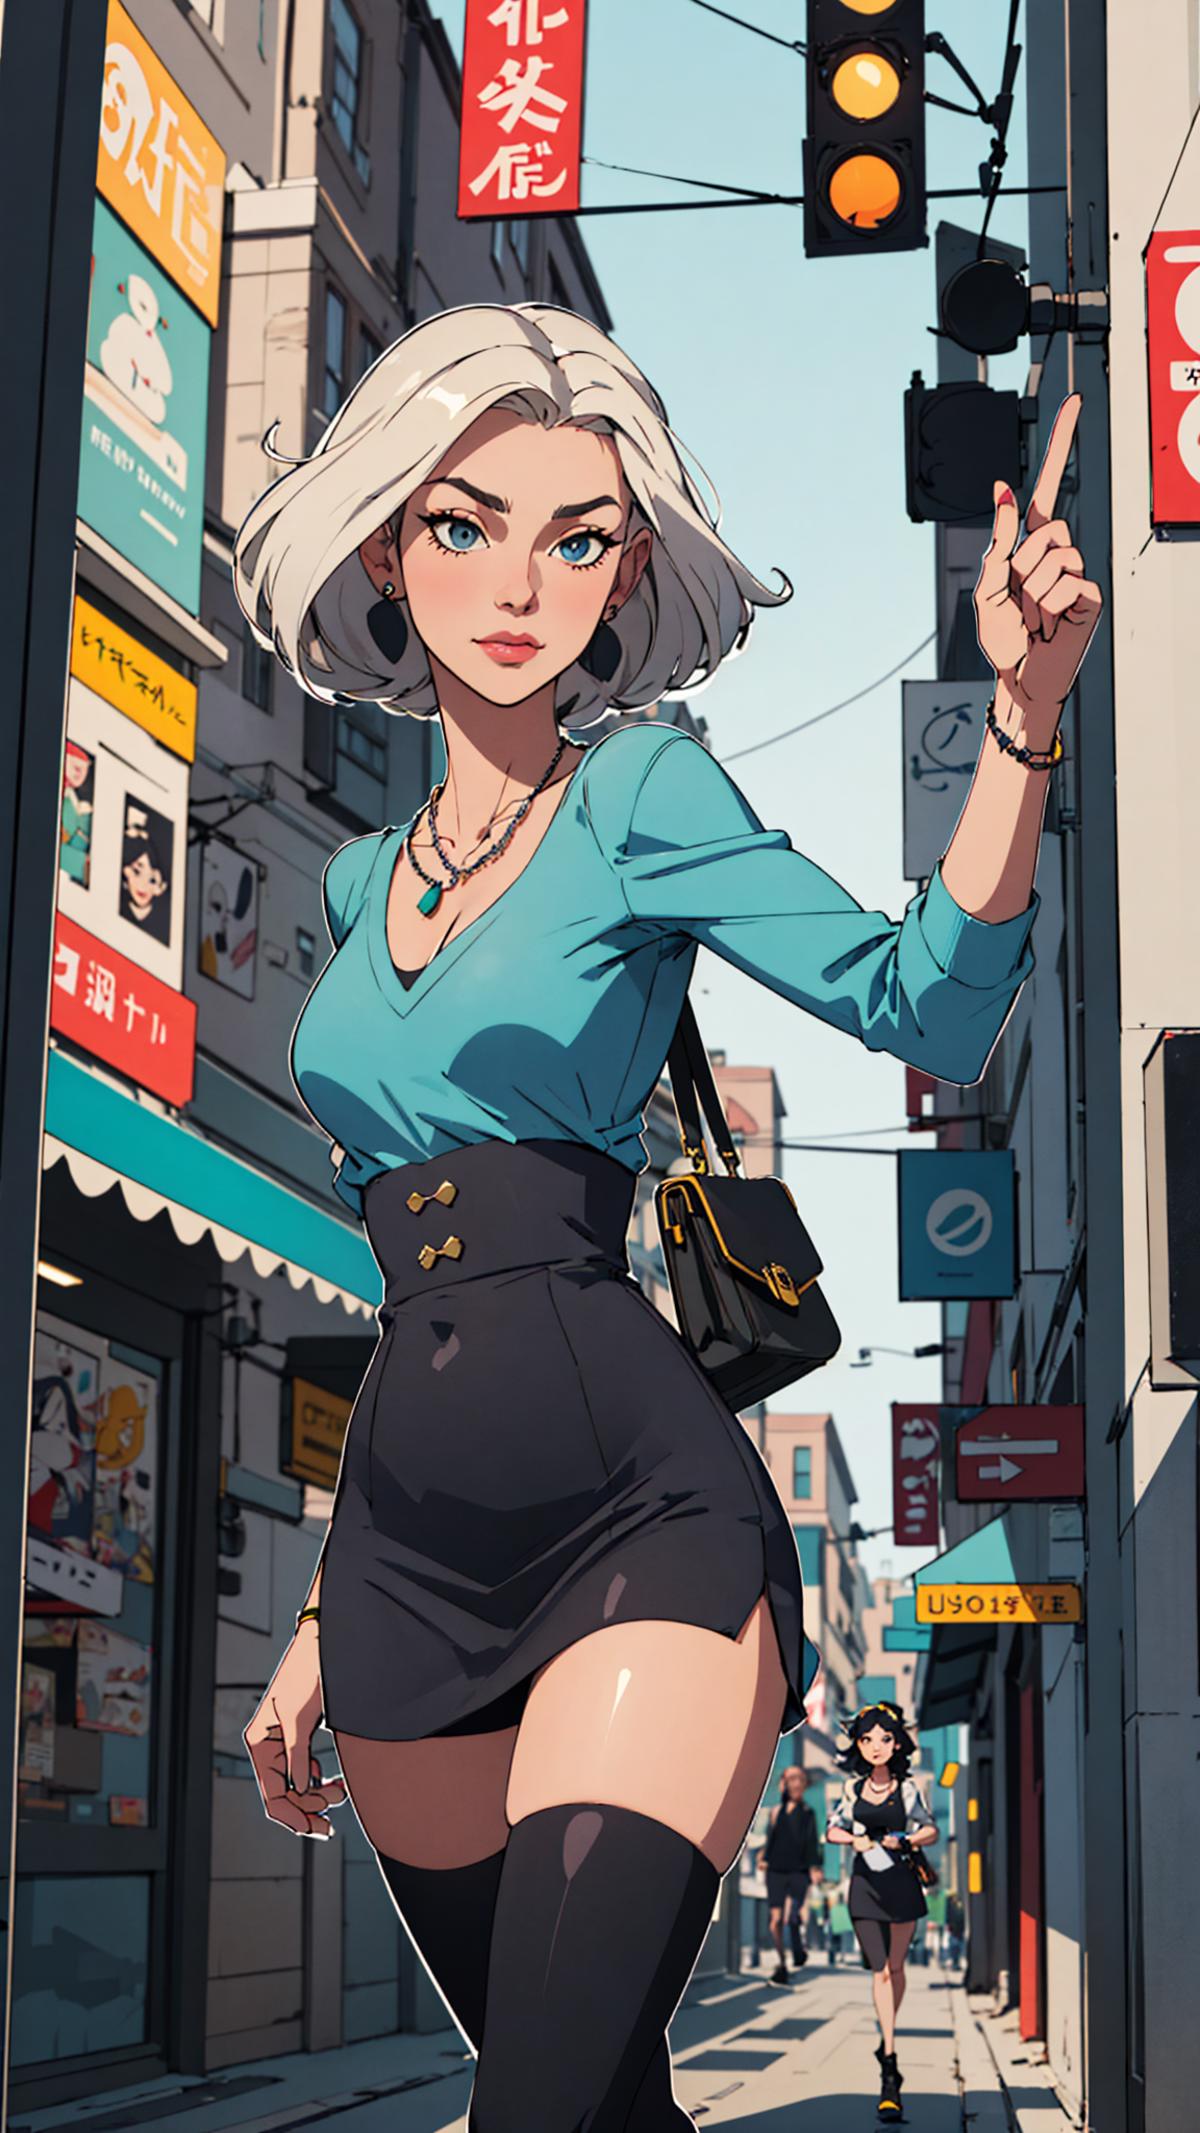 A cartoon image of a woman in a blue shirt and black pants holding a purse and pointing.